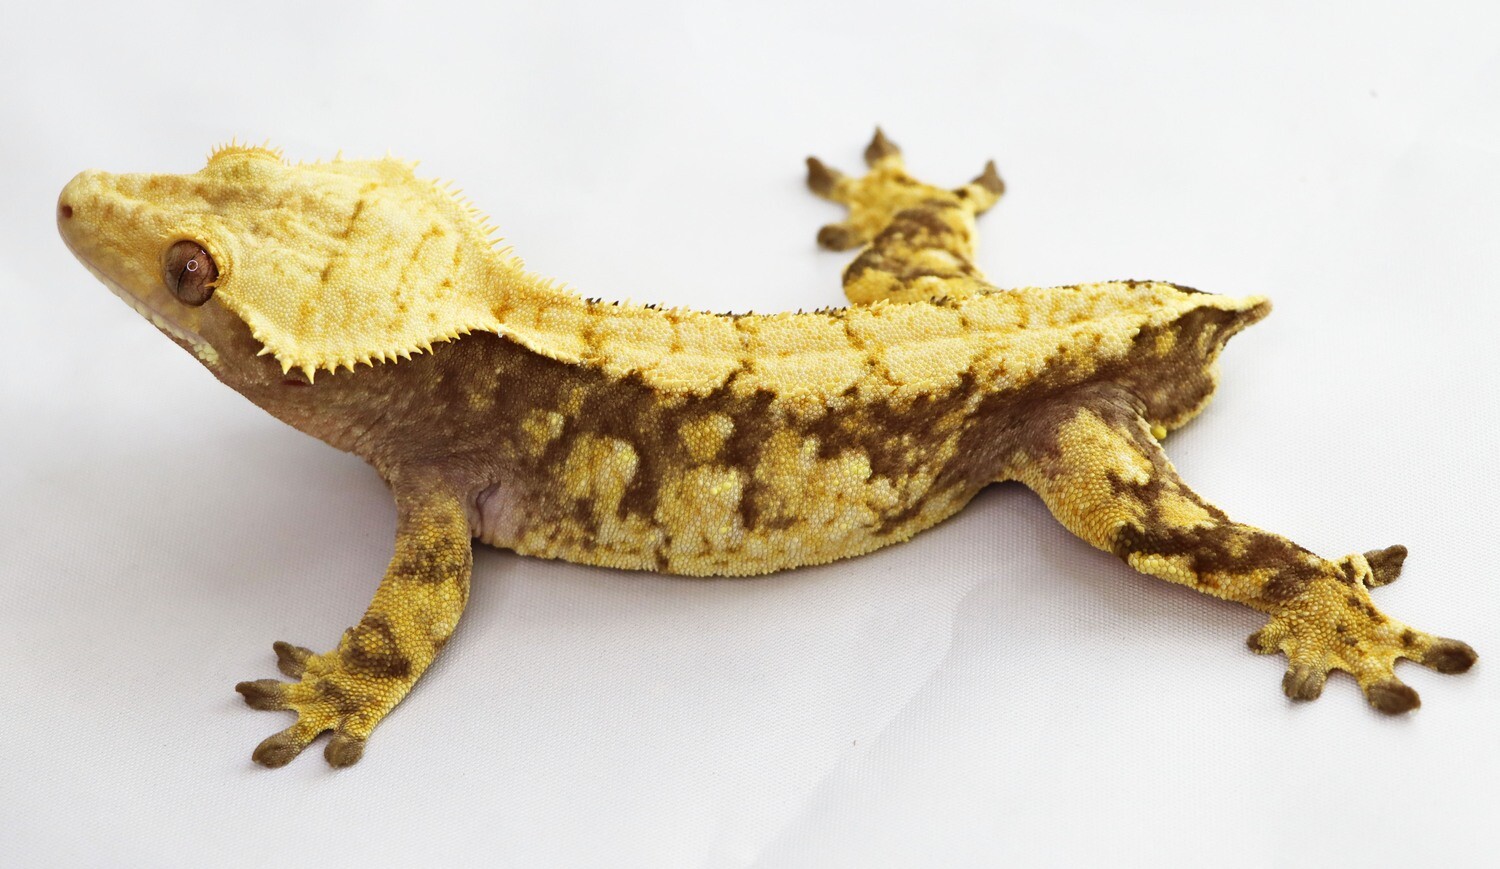 READY TO BREED BRIGHT YELLOW - Extreme Harlequin [Male] [UE048] Crested Gecko Correlophus Ciliatus